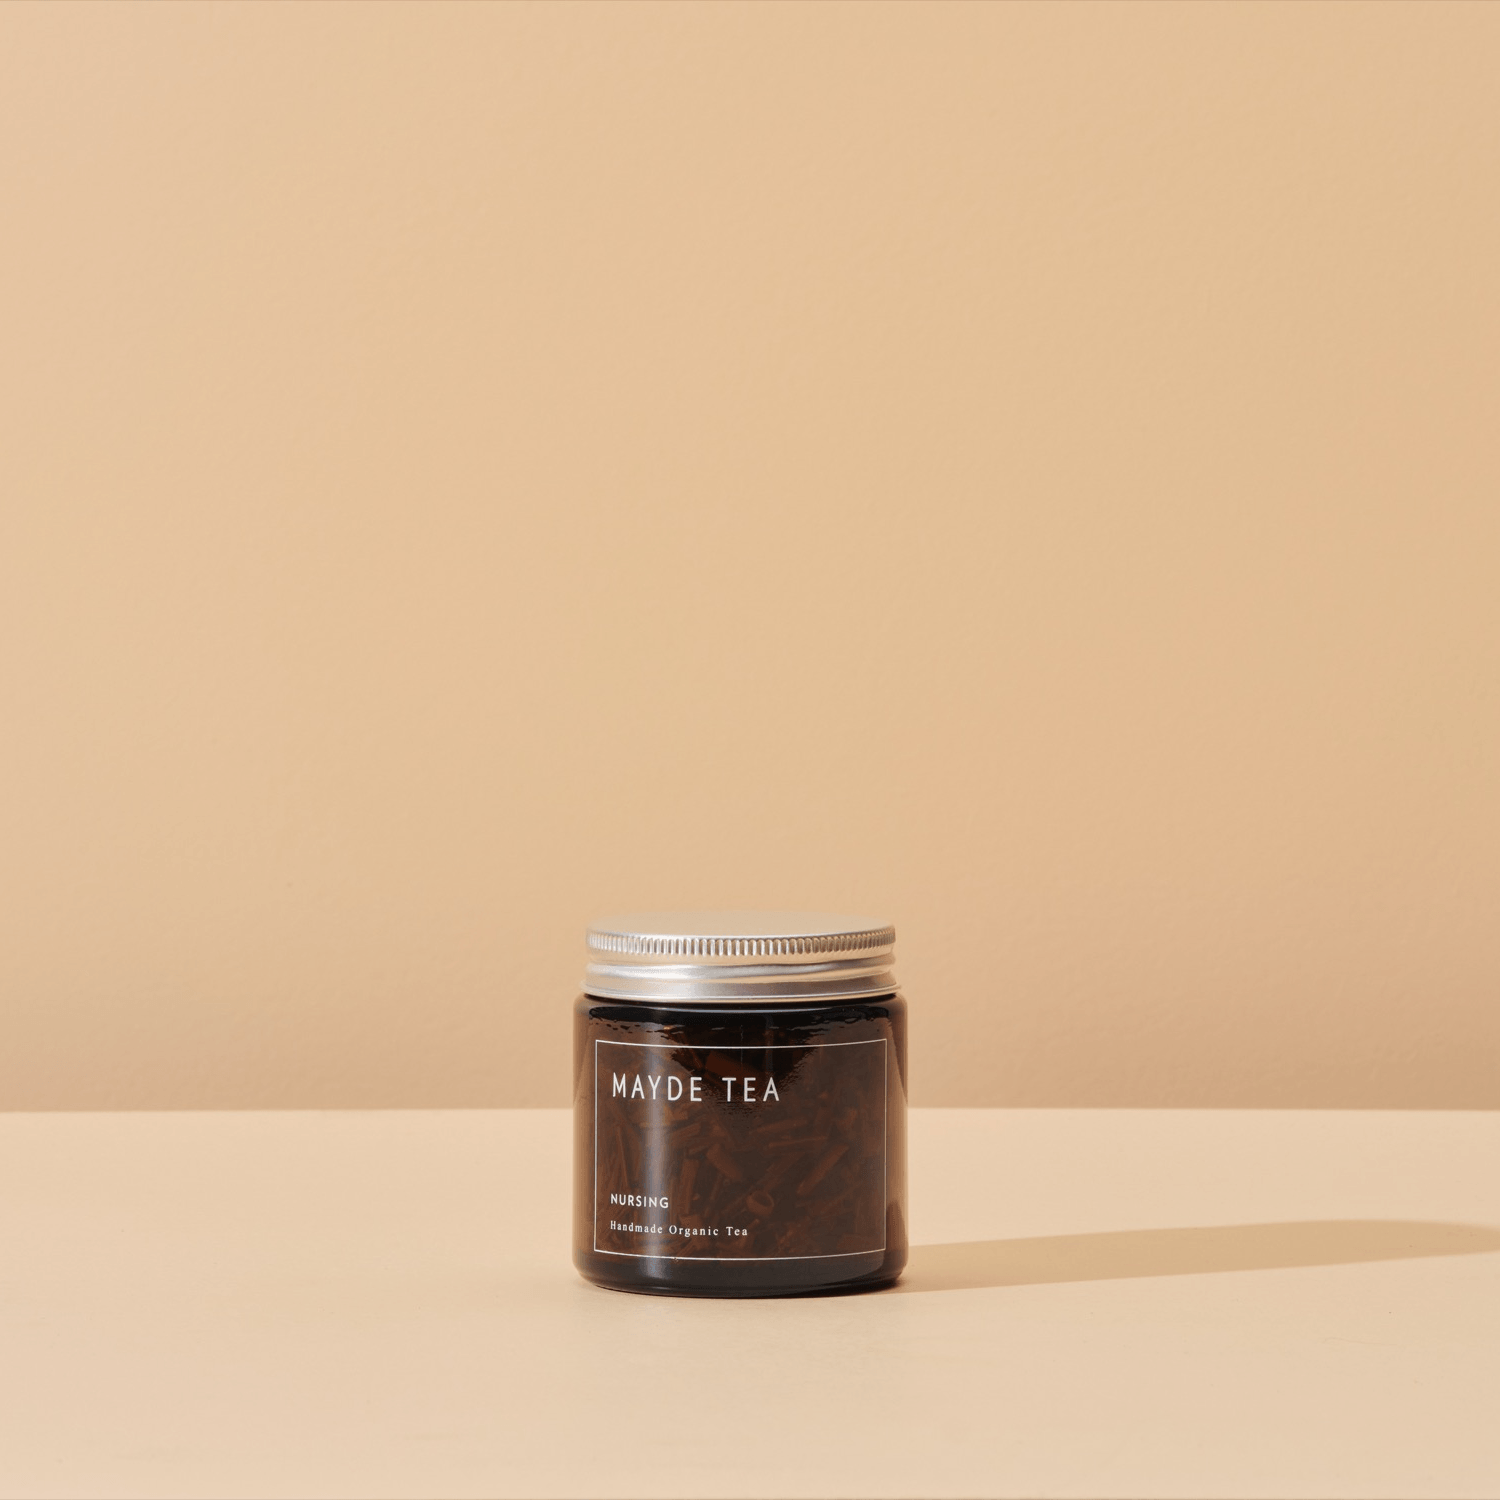 This image shows our Mayde Nursing Tea, shot on a plain background